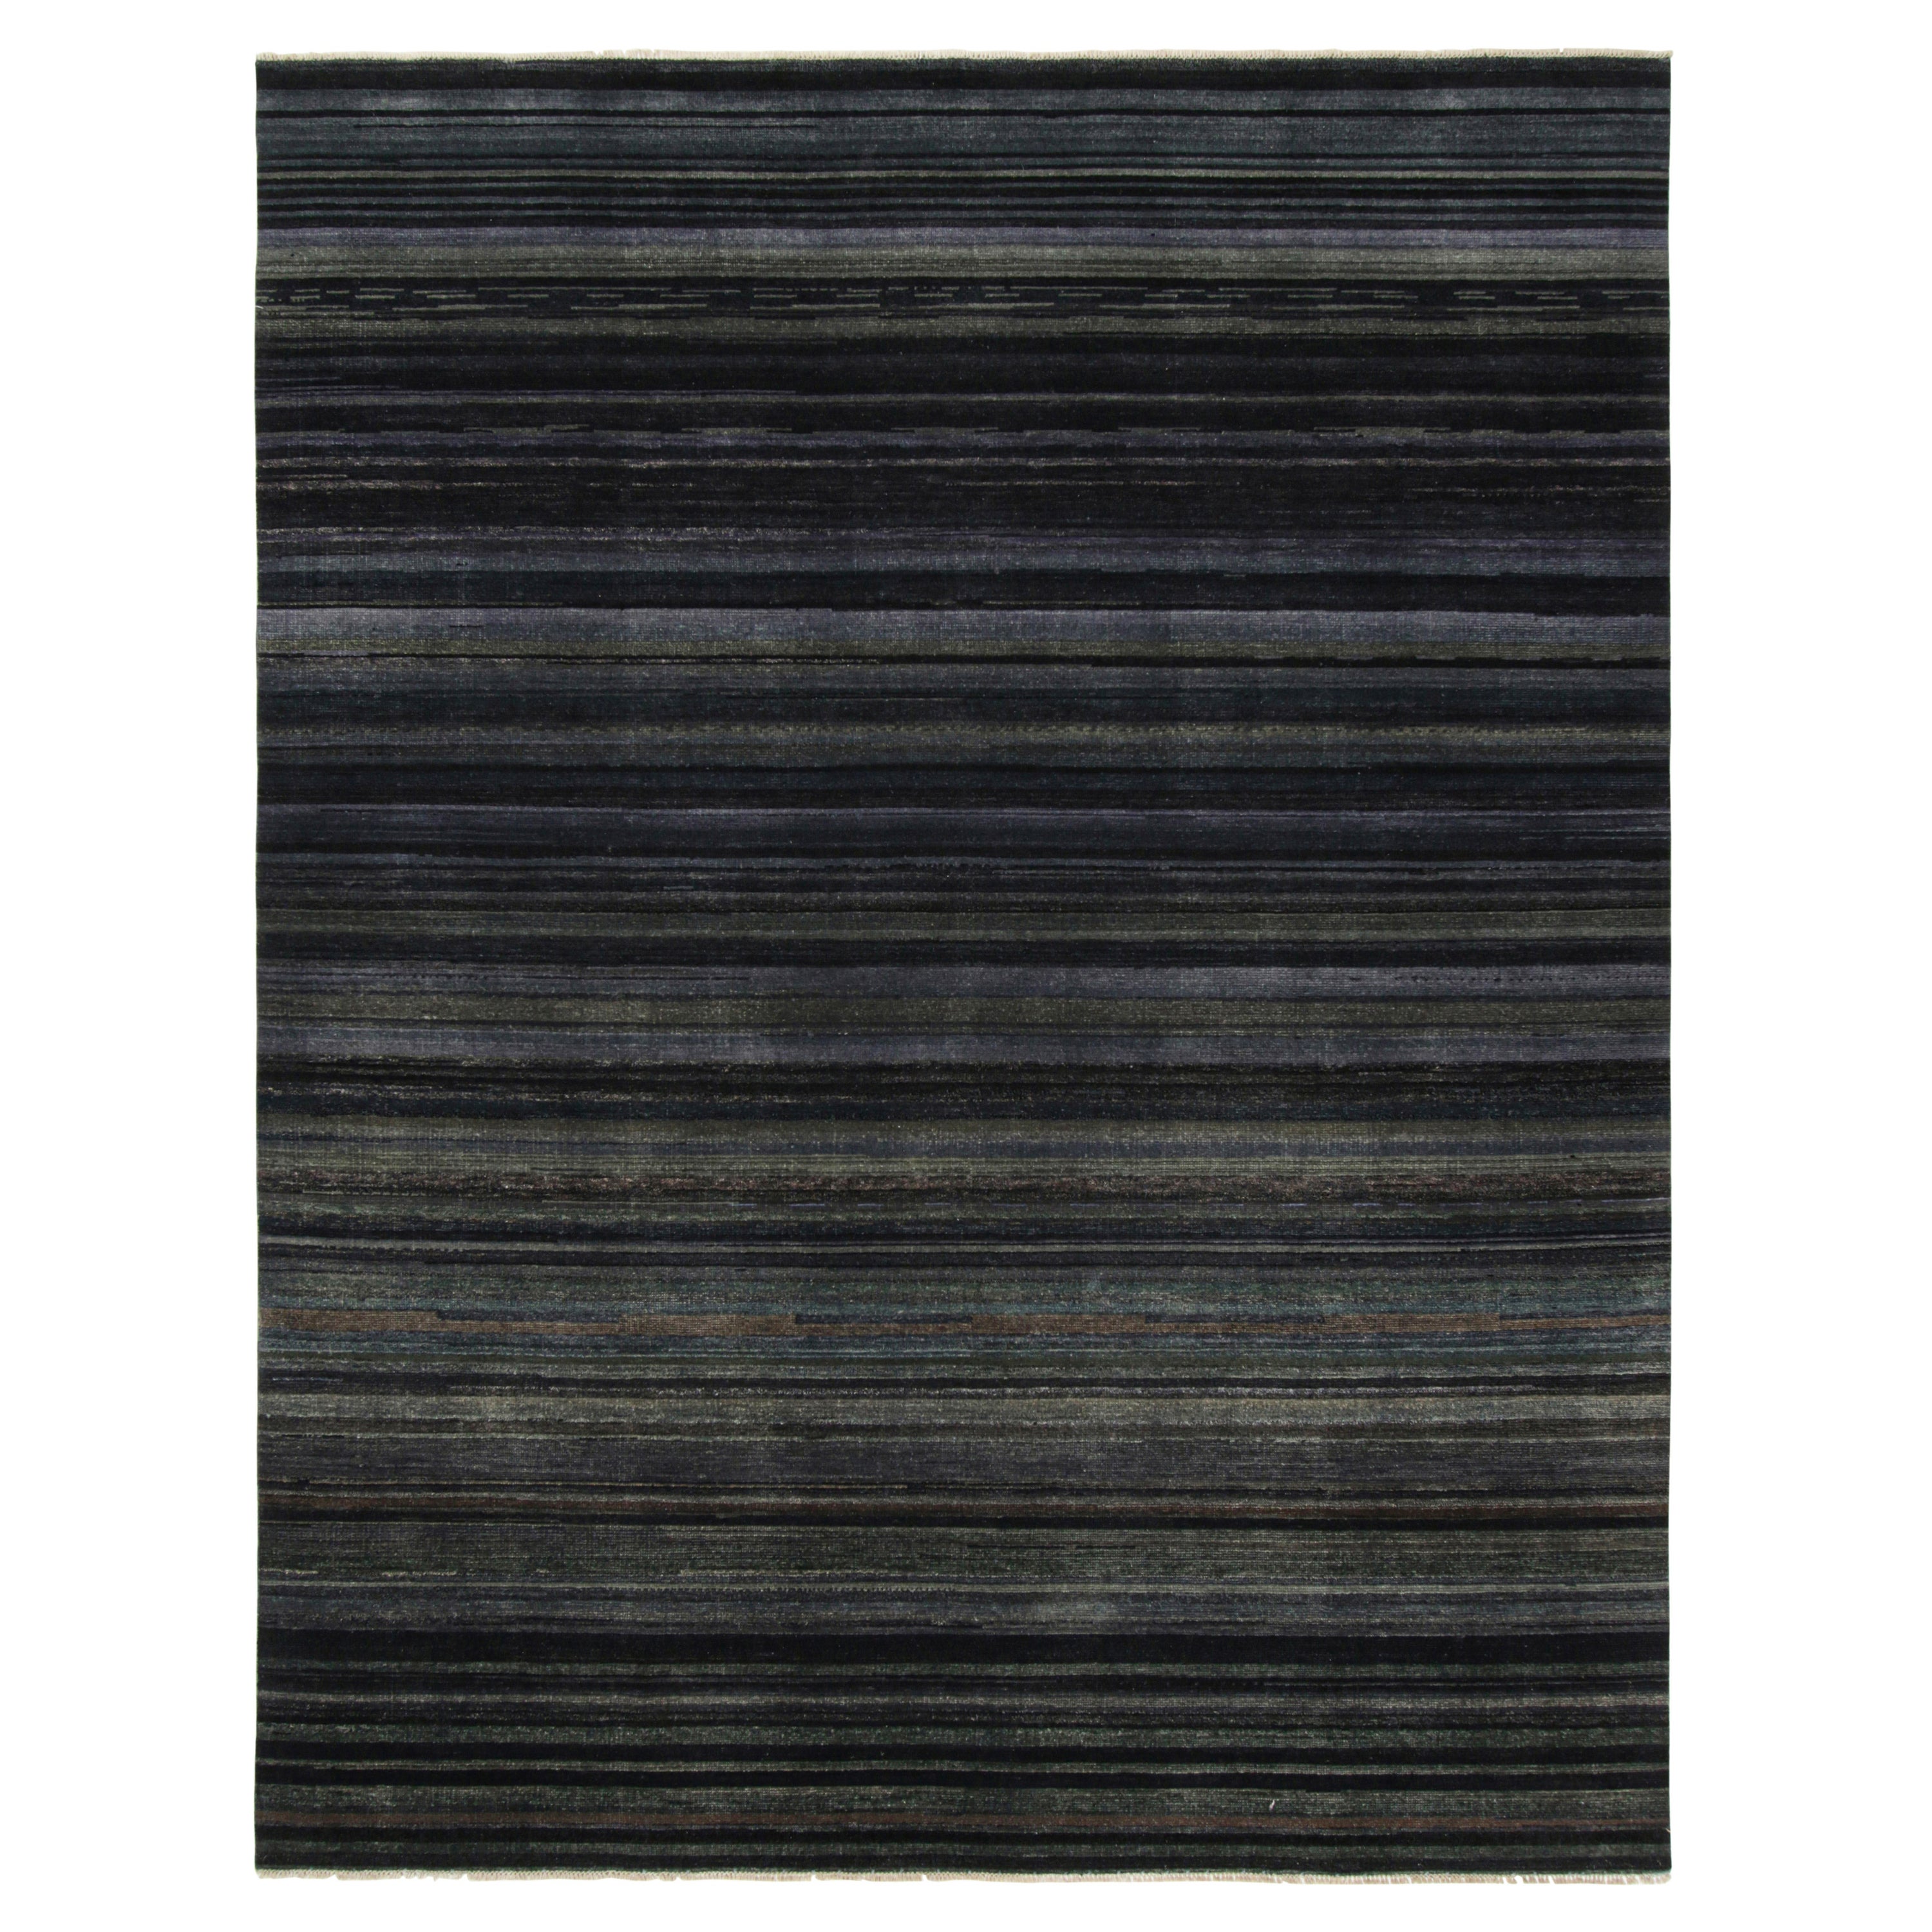 This 8x10 textural rug is an exciting new addition to the Texture of Color collection by Rug & Kilim, made with hand-knotted wool and a new take on the theme of this collection—particularly a vegetable dye like those used in antique or vintage rugs